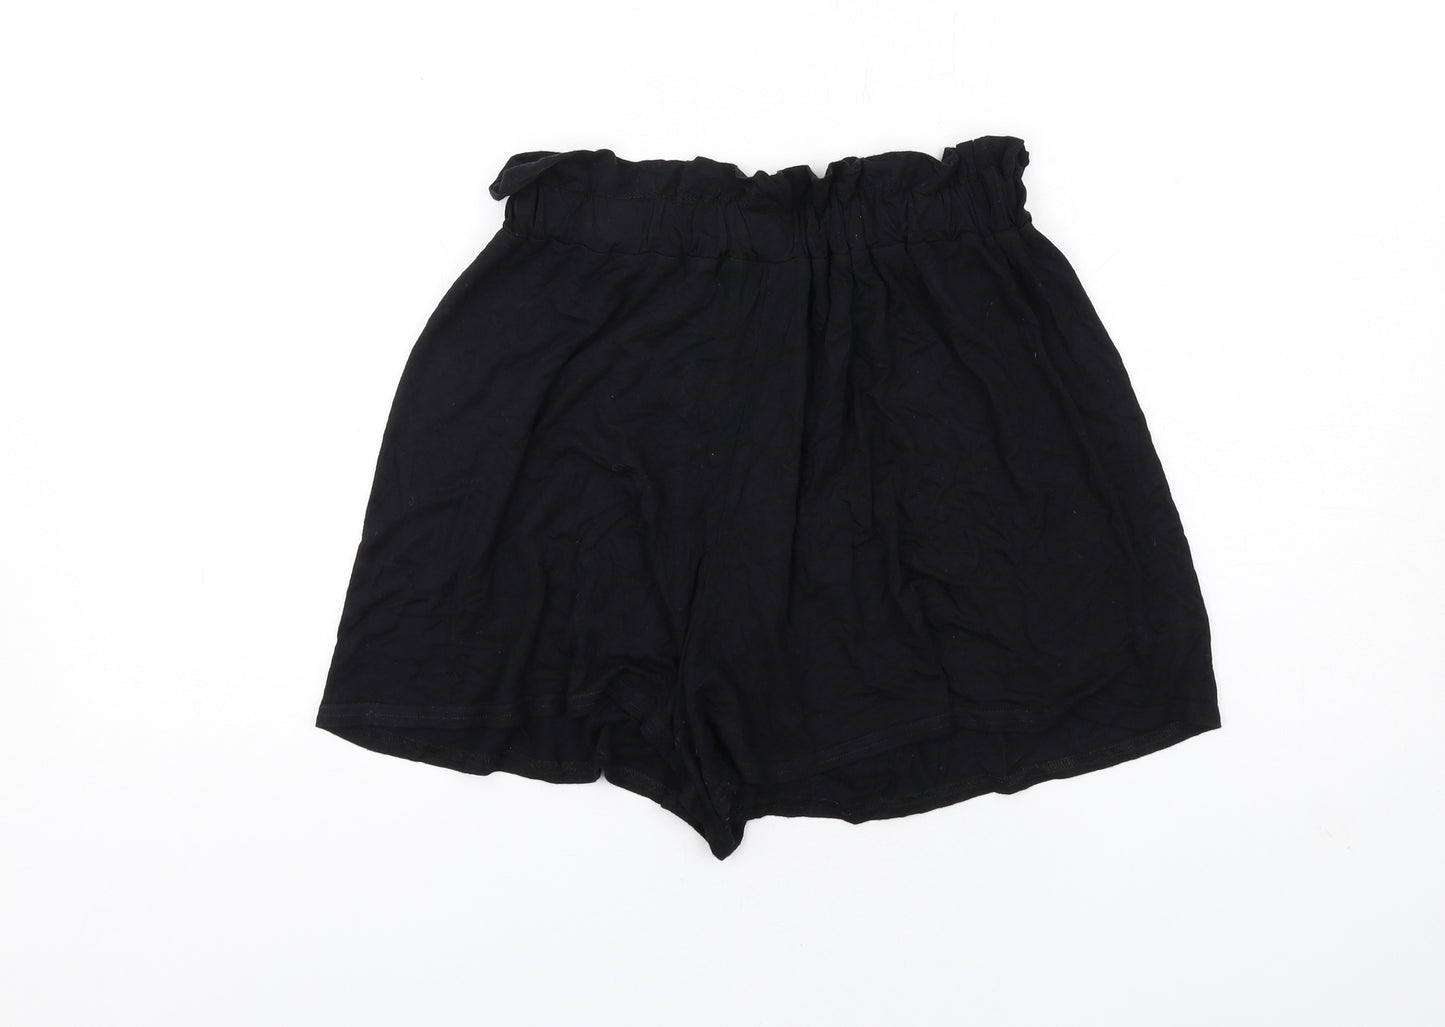 I SAW IT FIRST Womens Black Vinyl Paperbag Shorts Size 10 Regular Pull On